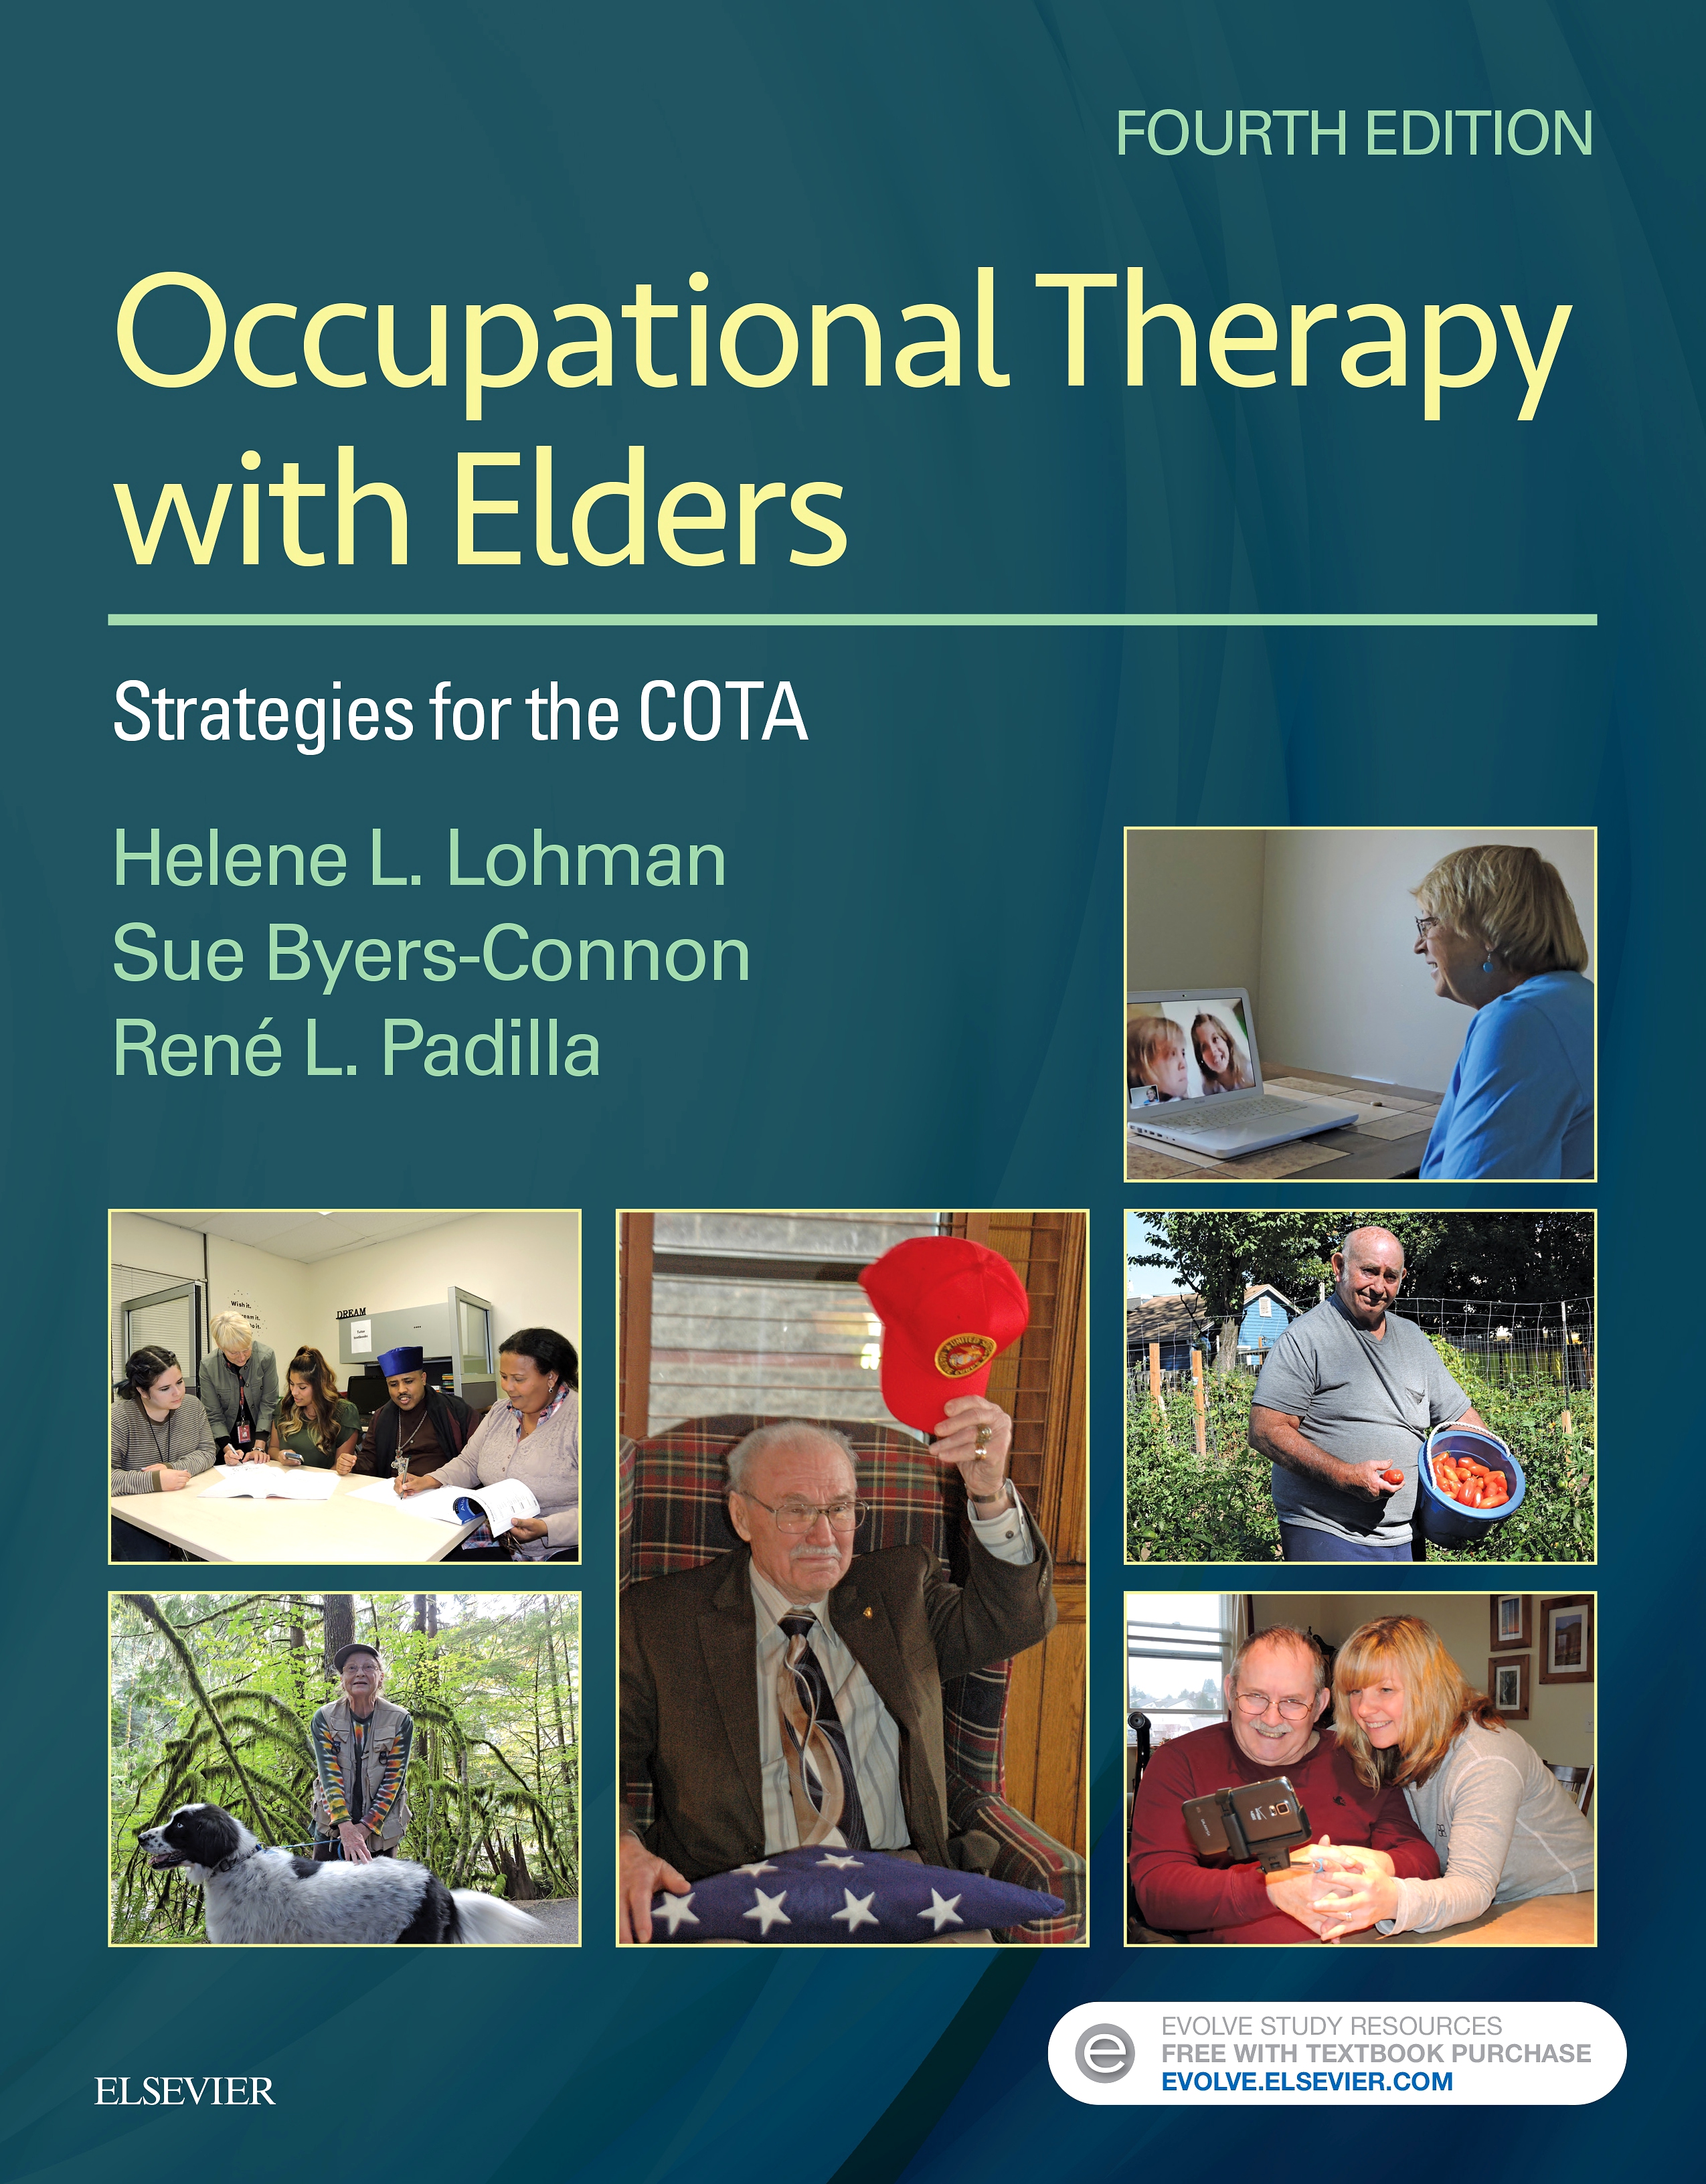 Evolve Resources for Occupational Therapy with Elders, 4th Edition